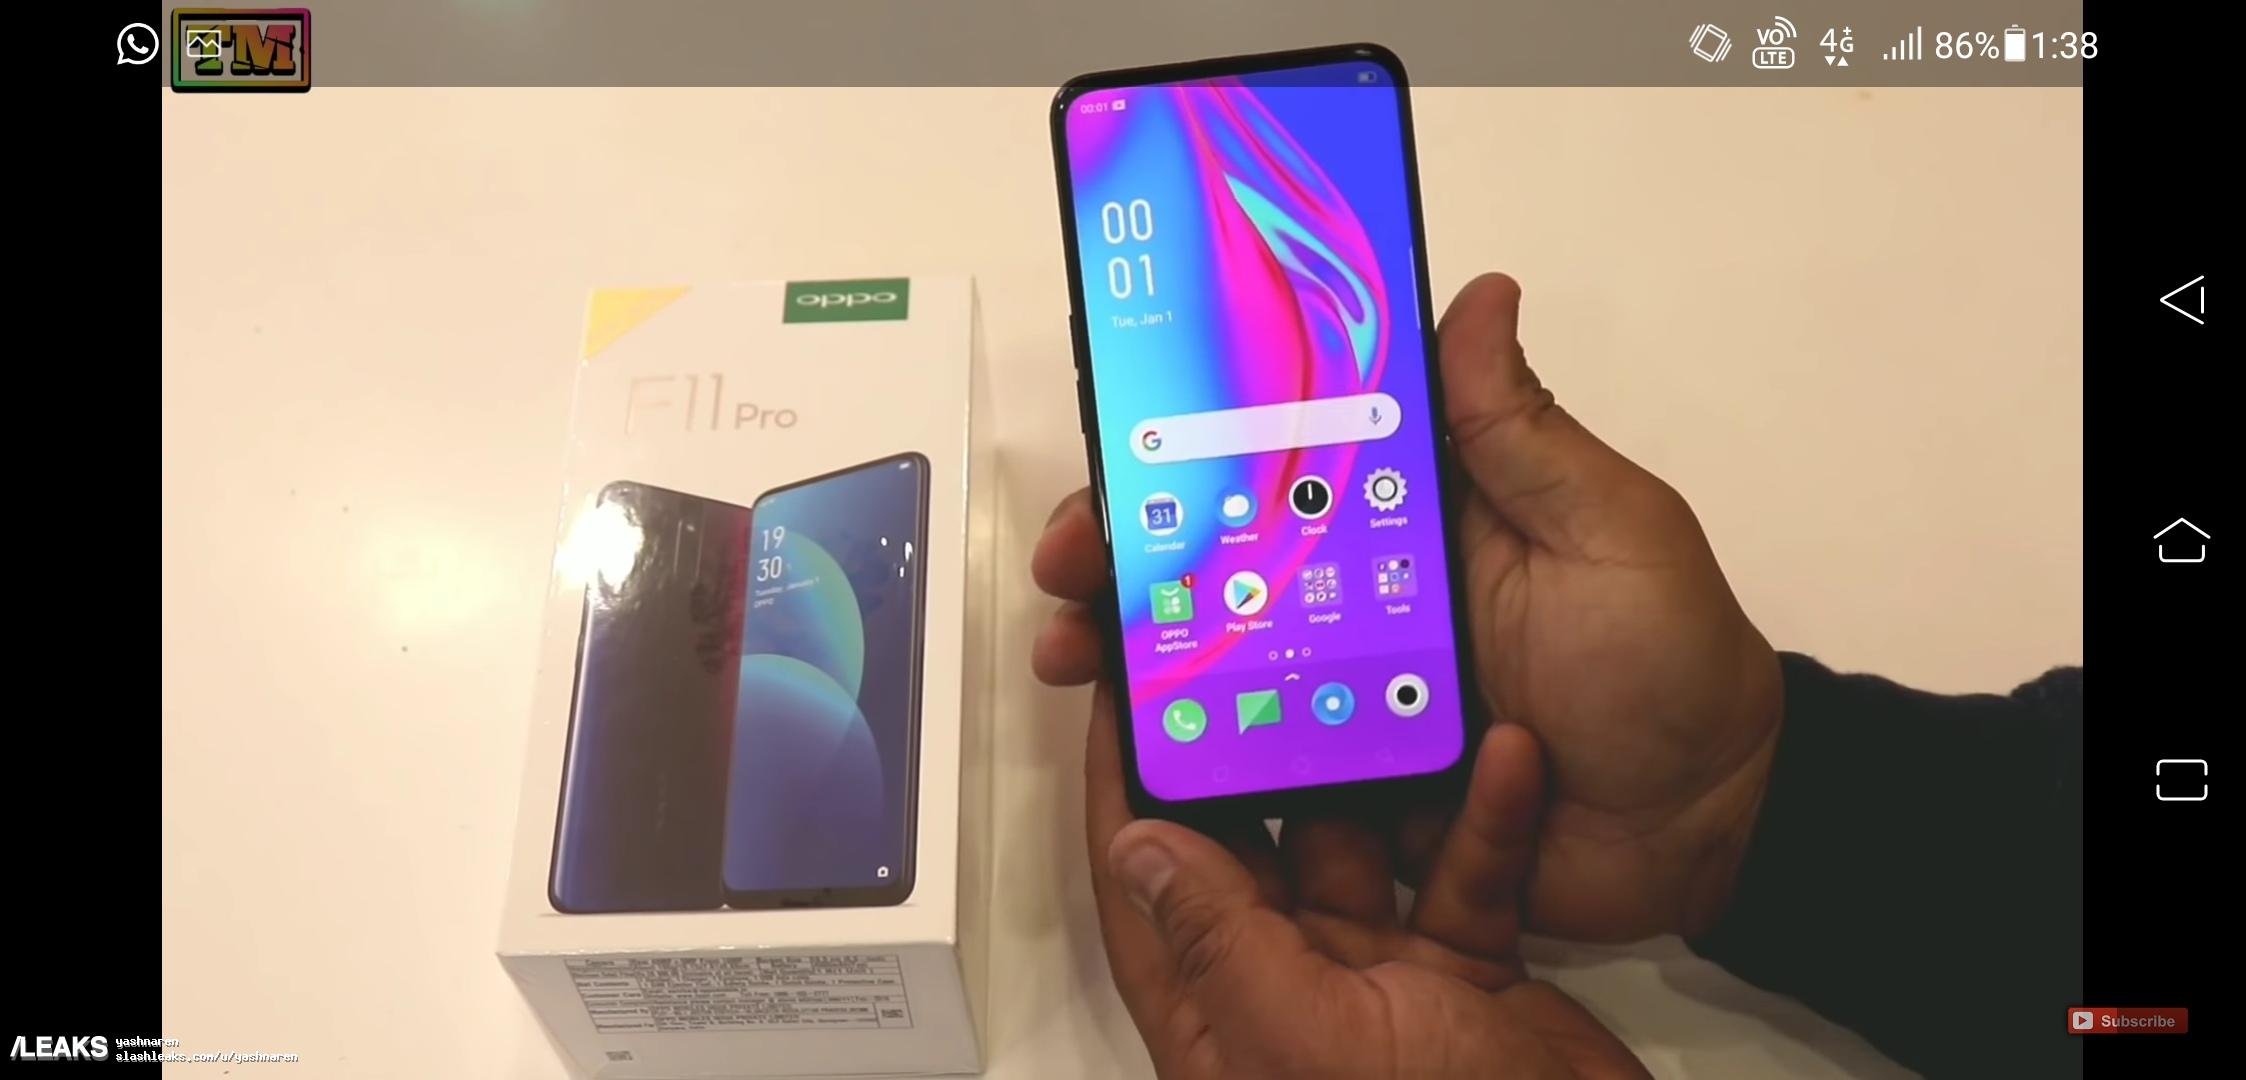 OPPO F11 Pro Live Images & Retail Box Surfaced Ahead Of Launch